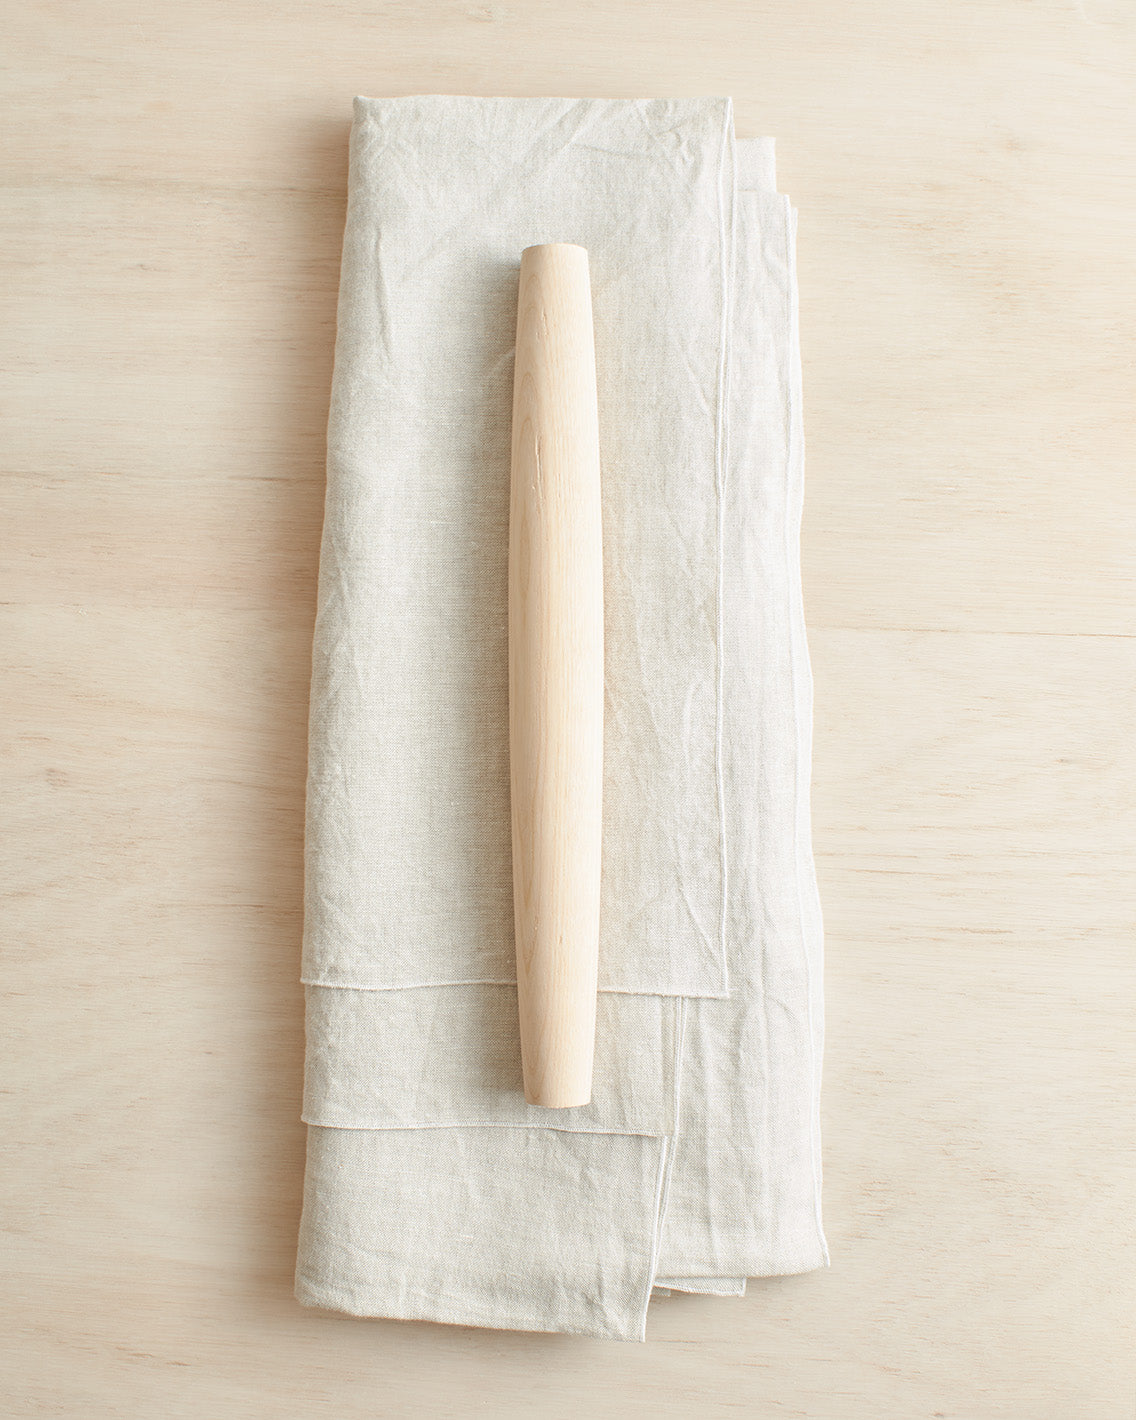 Tapered Rolling Pin in English Ash Wood